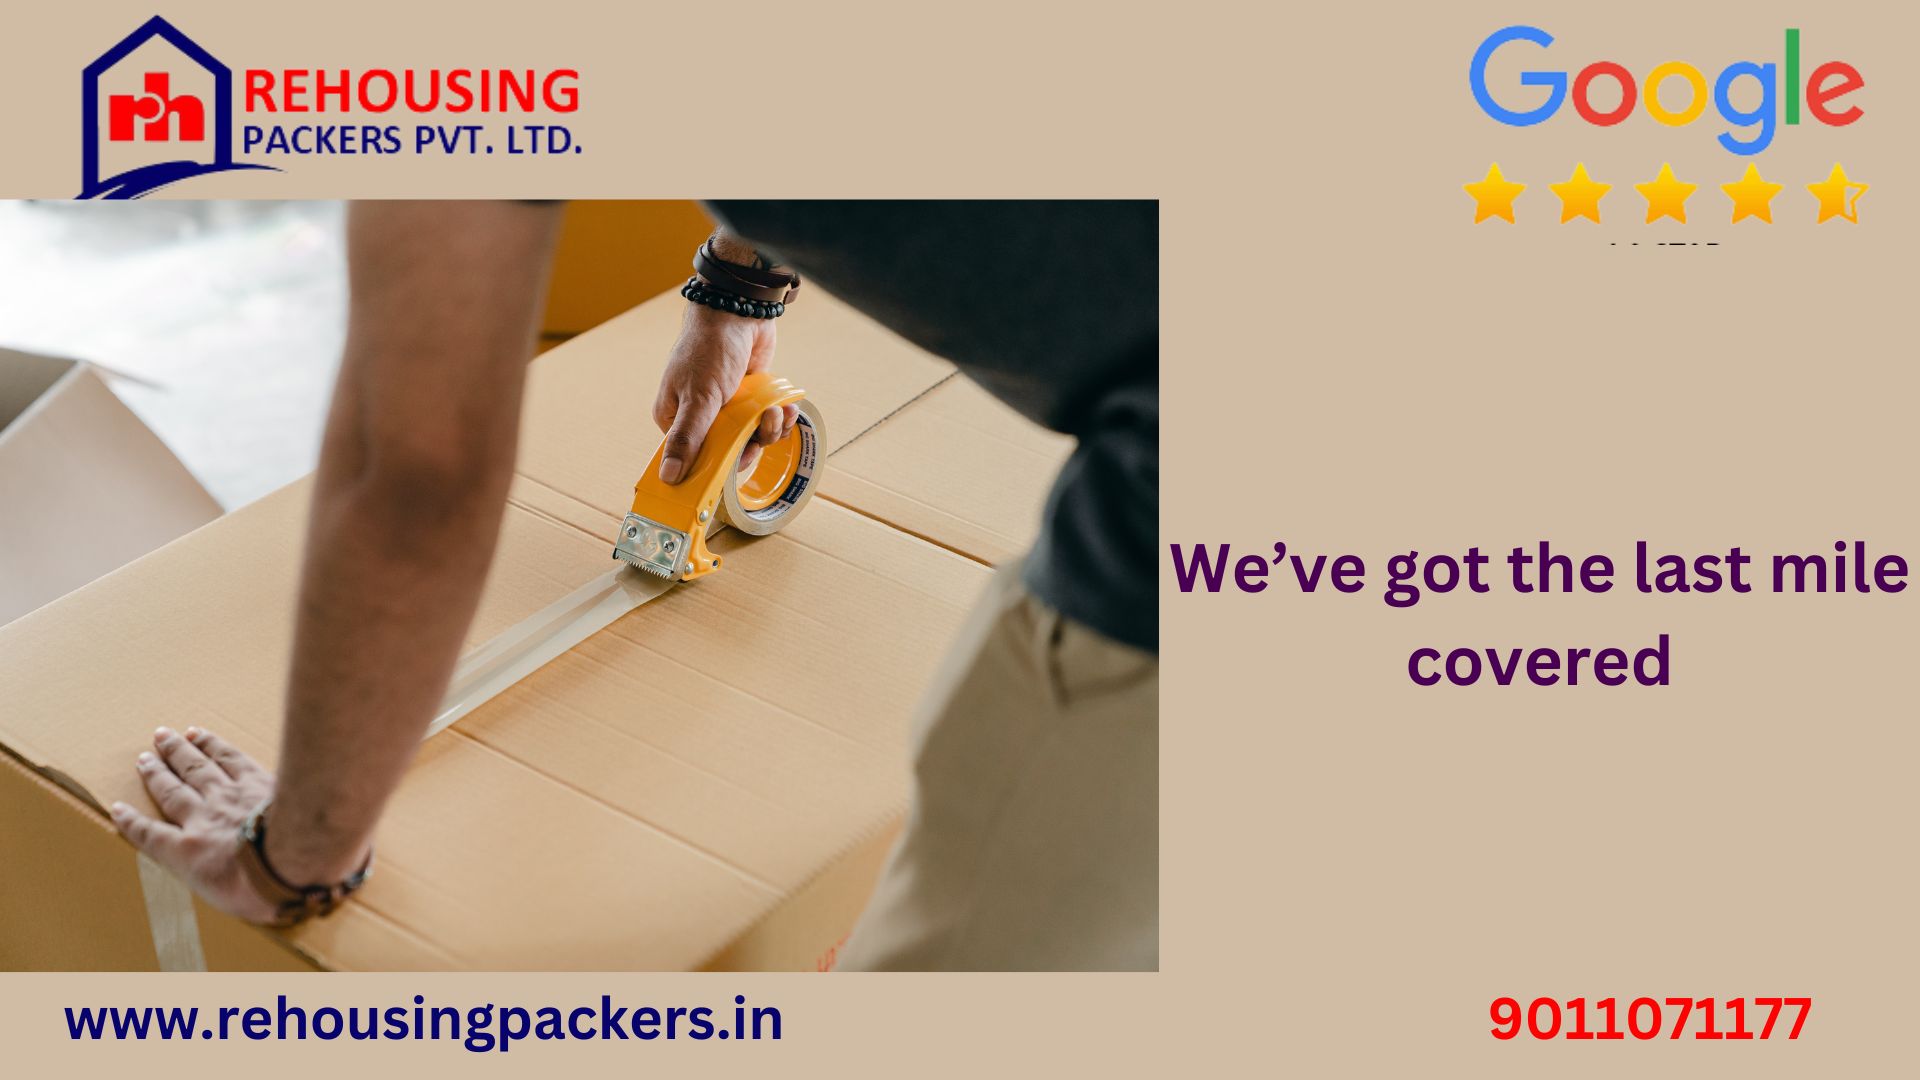 Packers and Movers from Delhi to Chandigarh